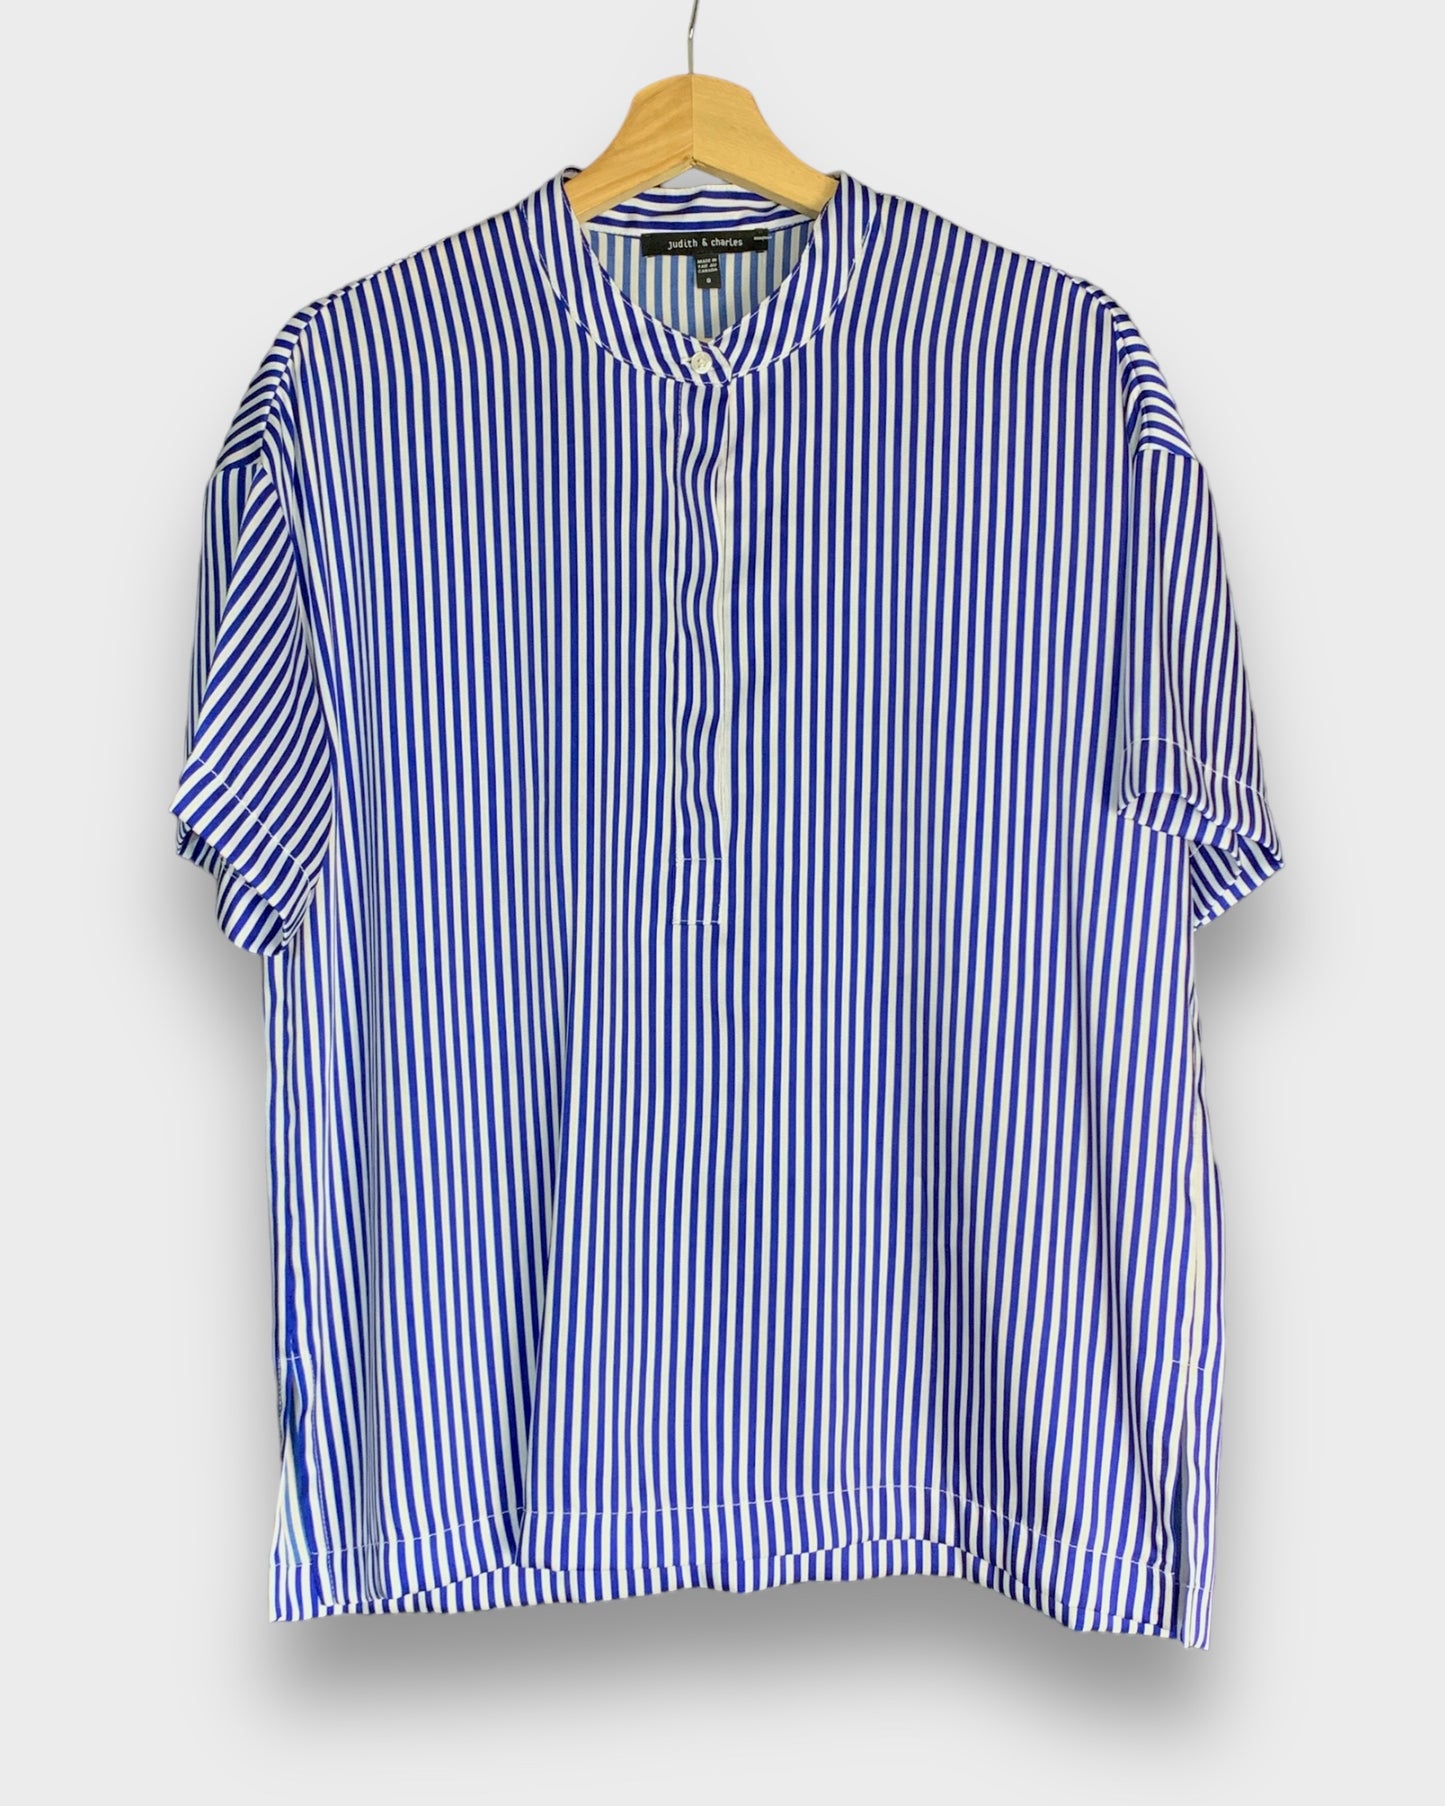 Judith &amp; Charles white and blue striped short-sleeved shirt